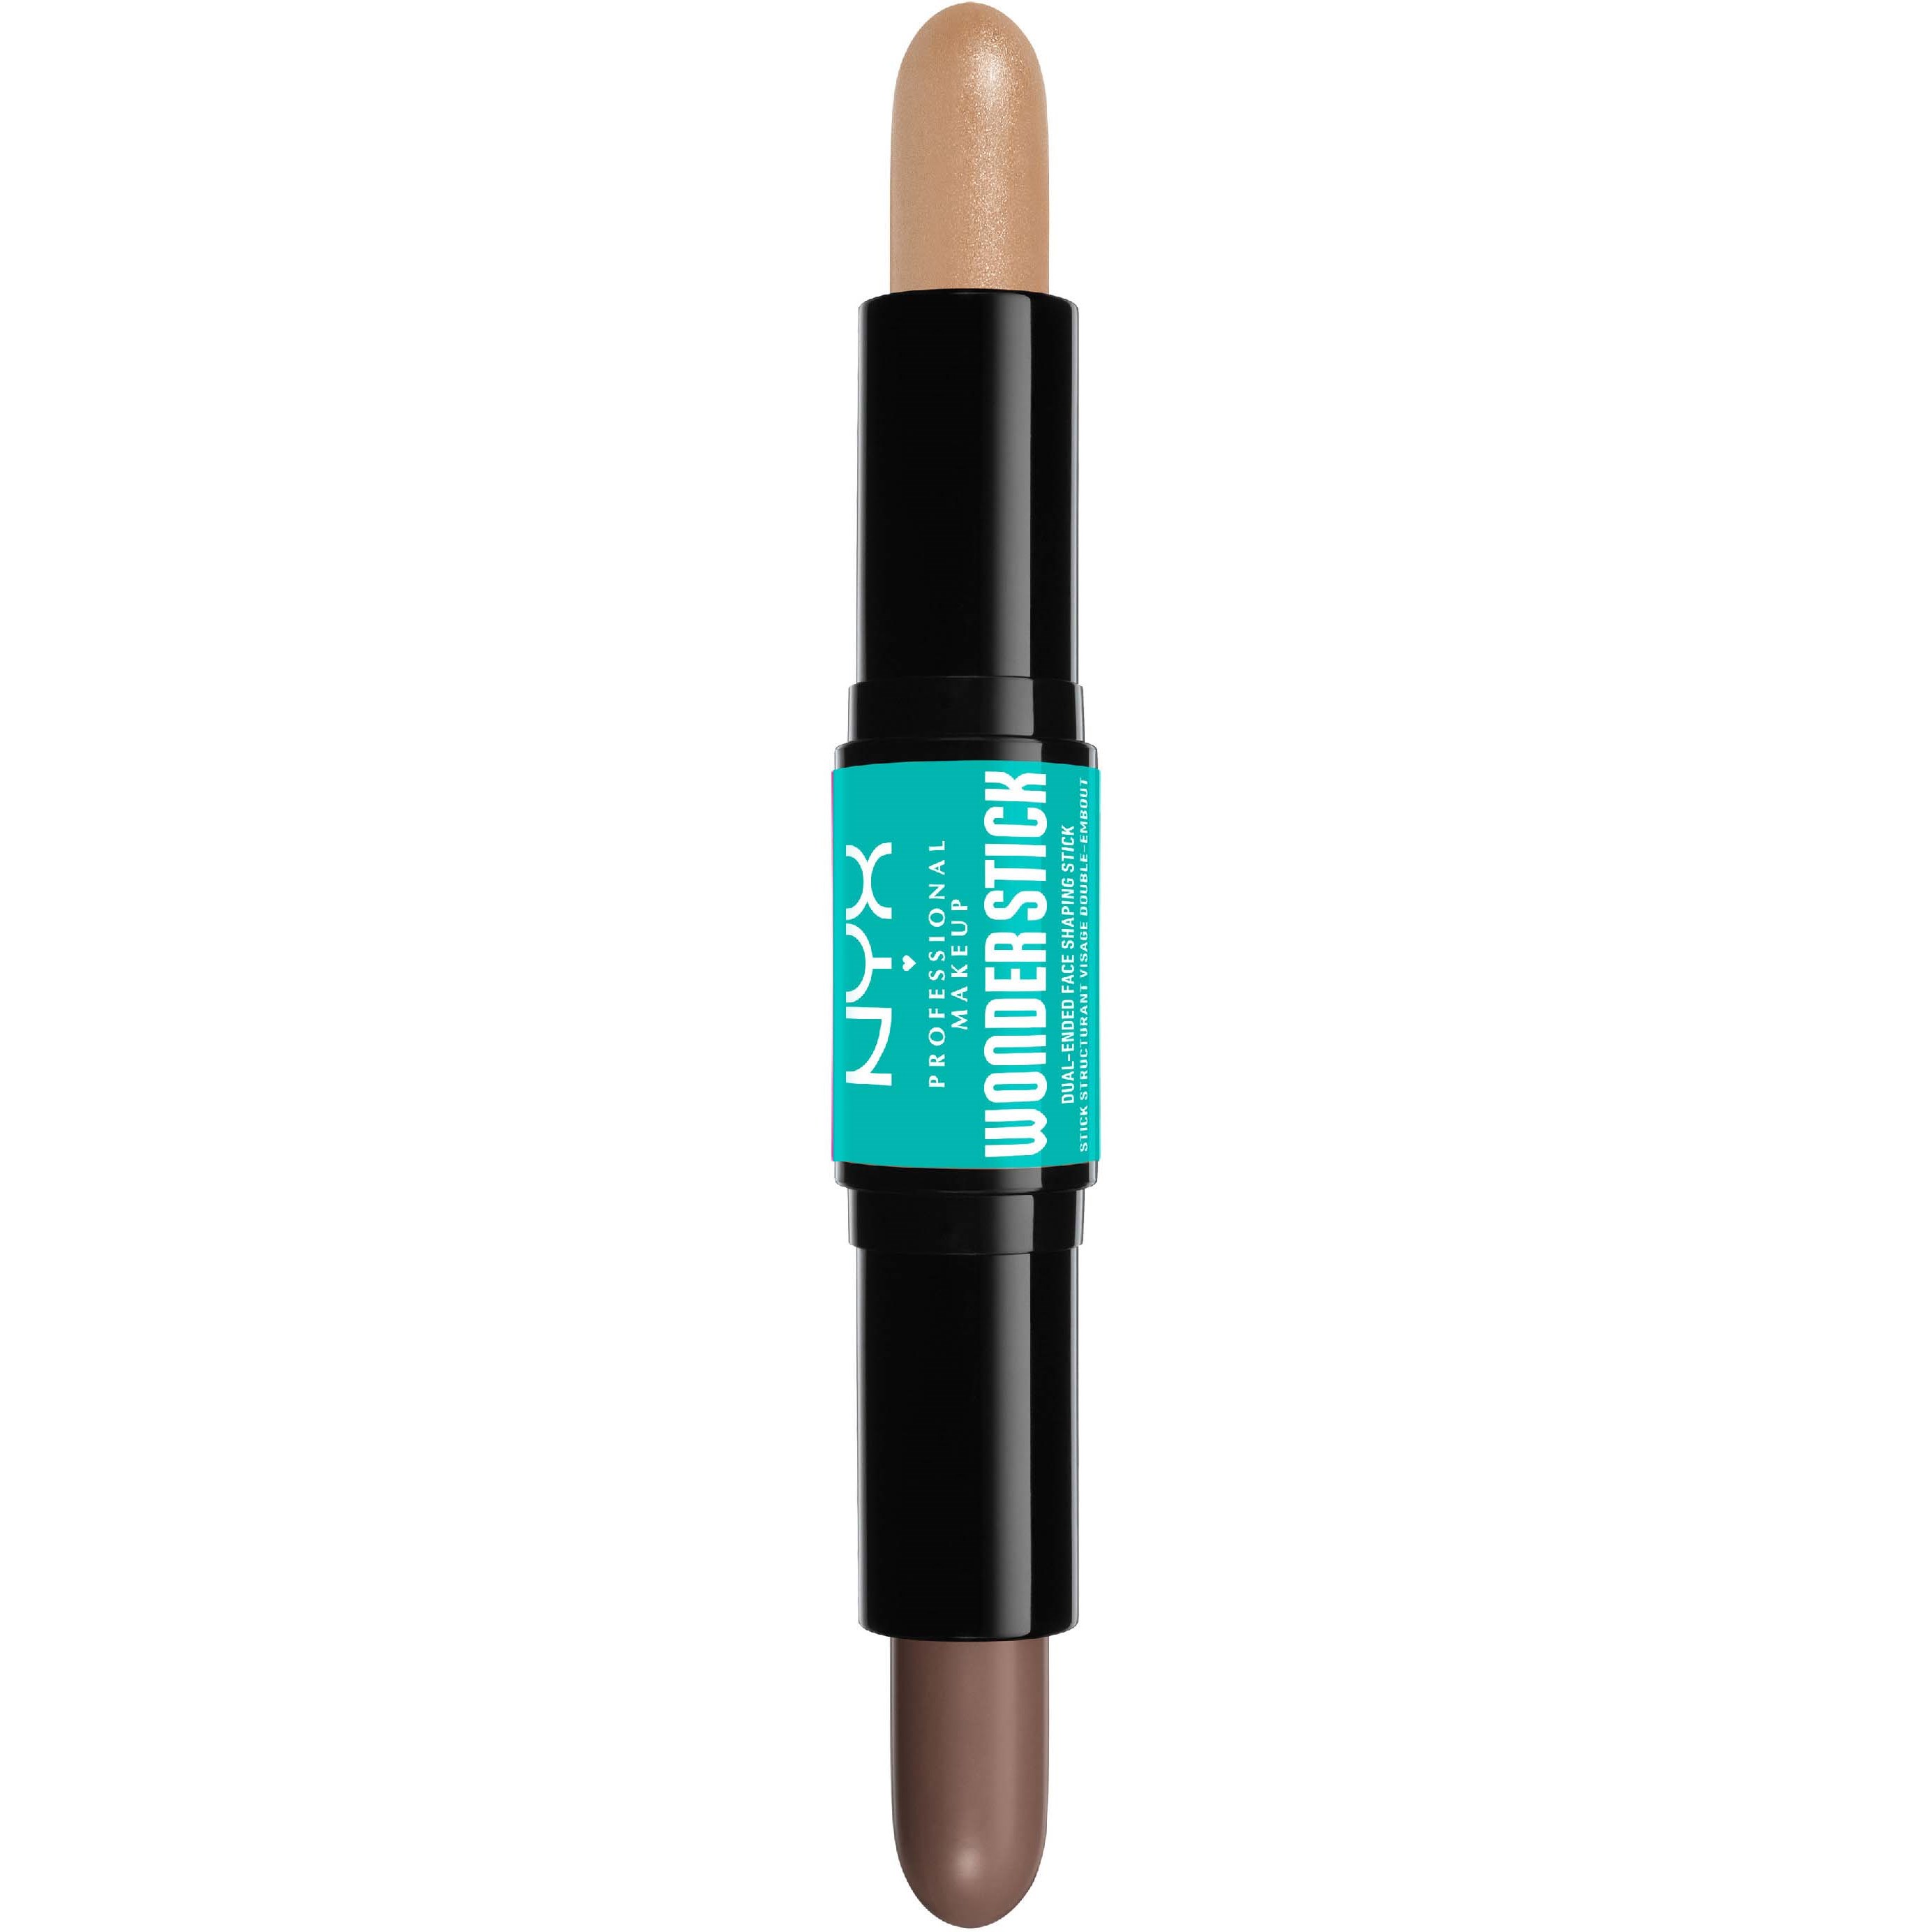 Läs mer om NYX PROFESSIONAL MAKEUP Wonder Stick Dual-Ended Face Shaping Stick 01